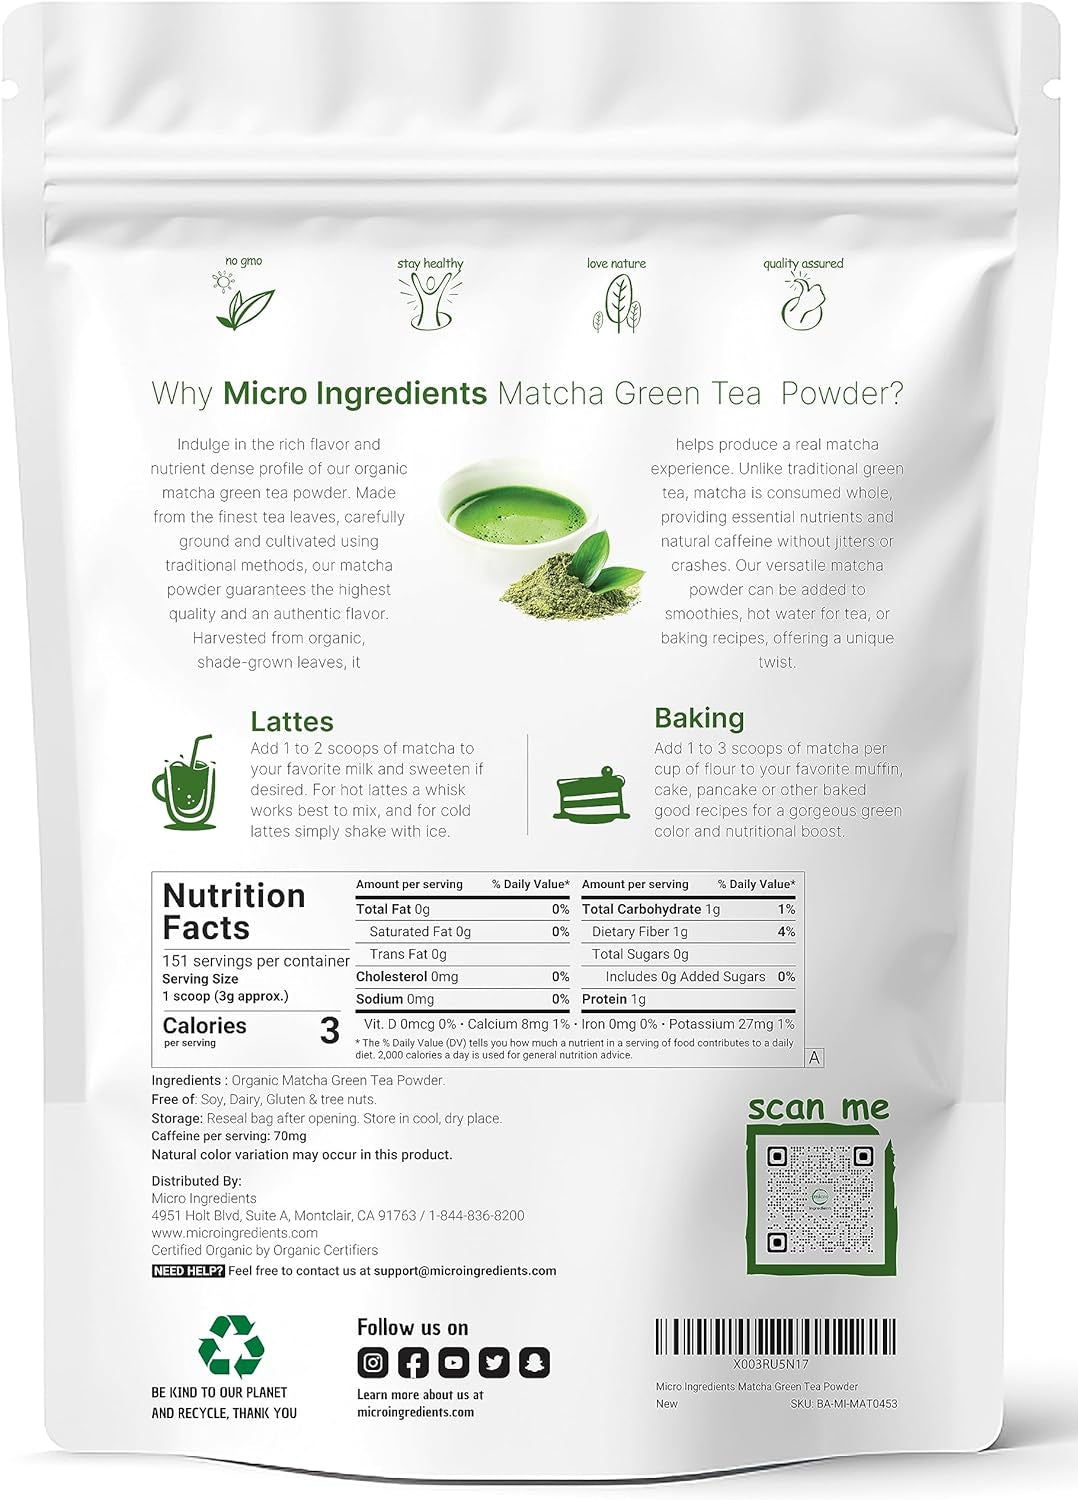 Organic Matcha Green Tea Powder, 1Lb | Premium First Harvest Japanese for Daily Beverage | 100% Pure Culinary Grade | No Sugar, Eco-Friendly Recyclable Bags